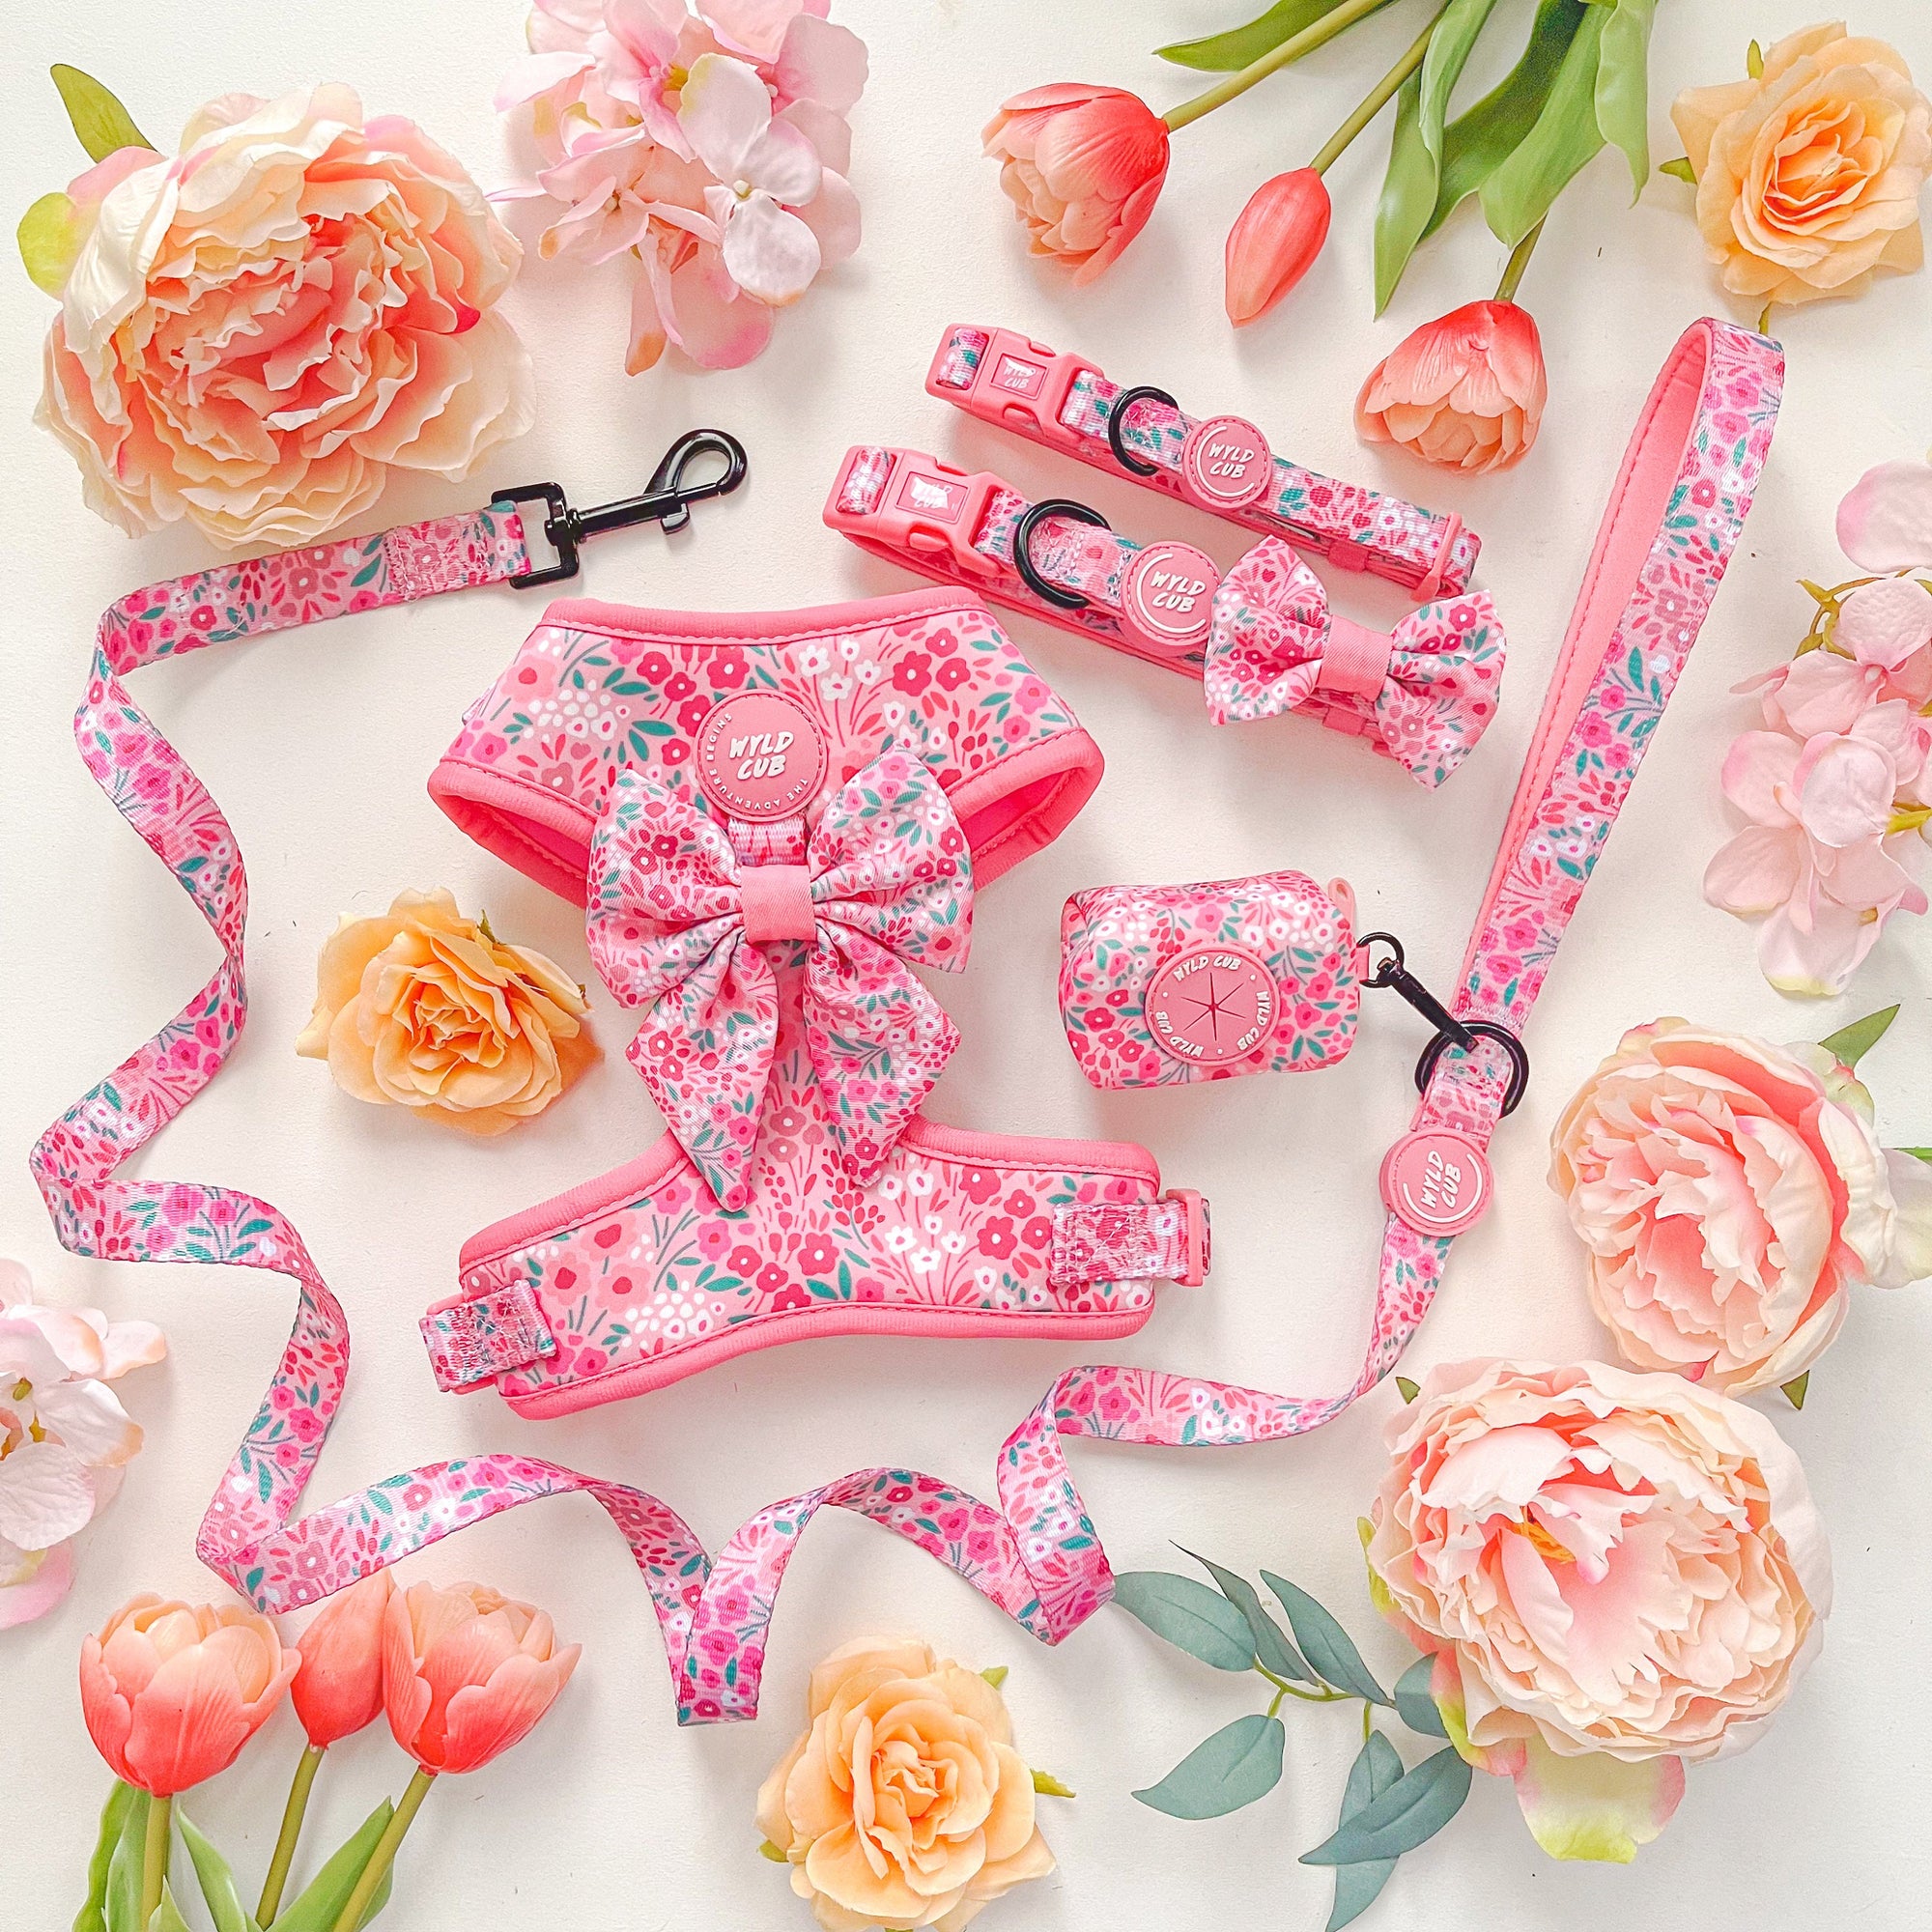 Paw Prize Adjustable Dog Harness in Pink Floral